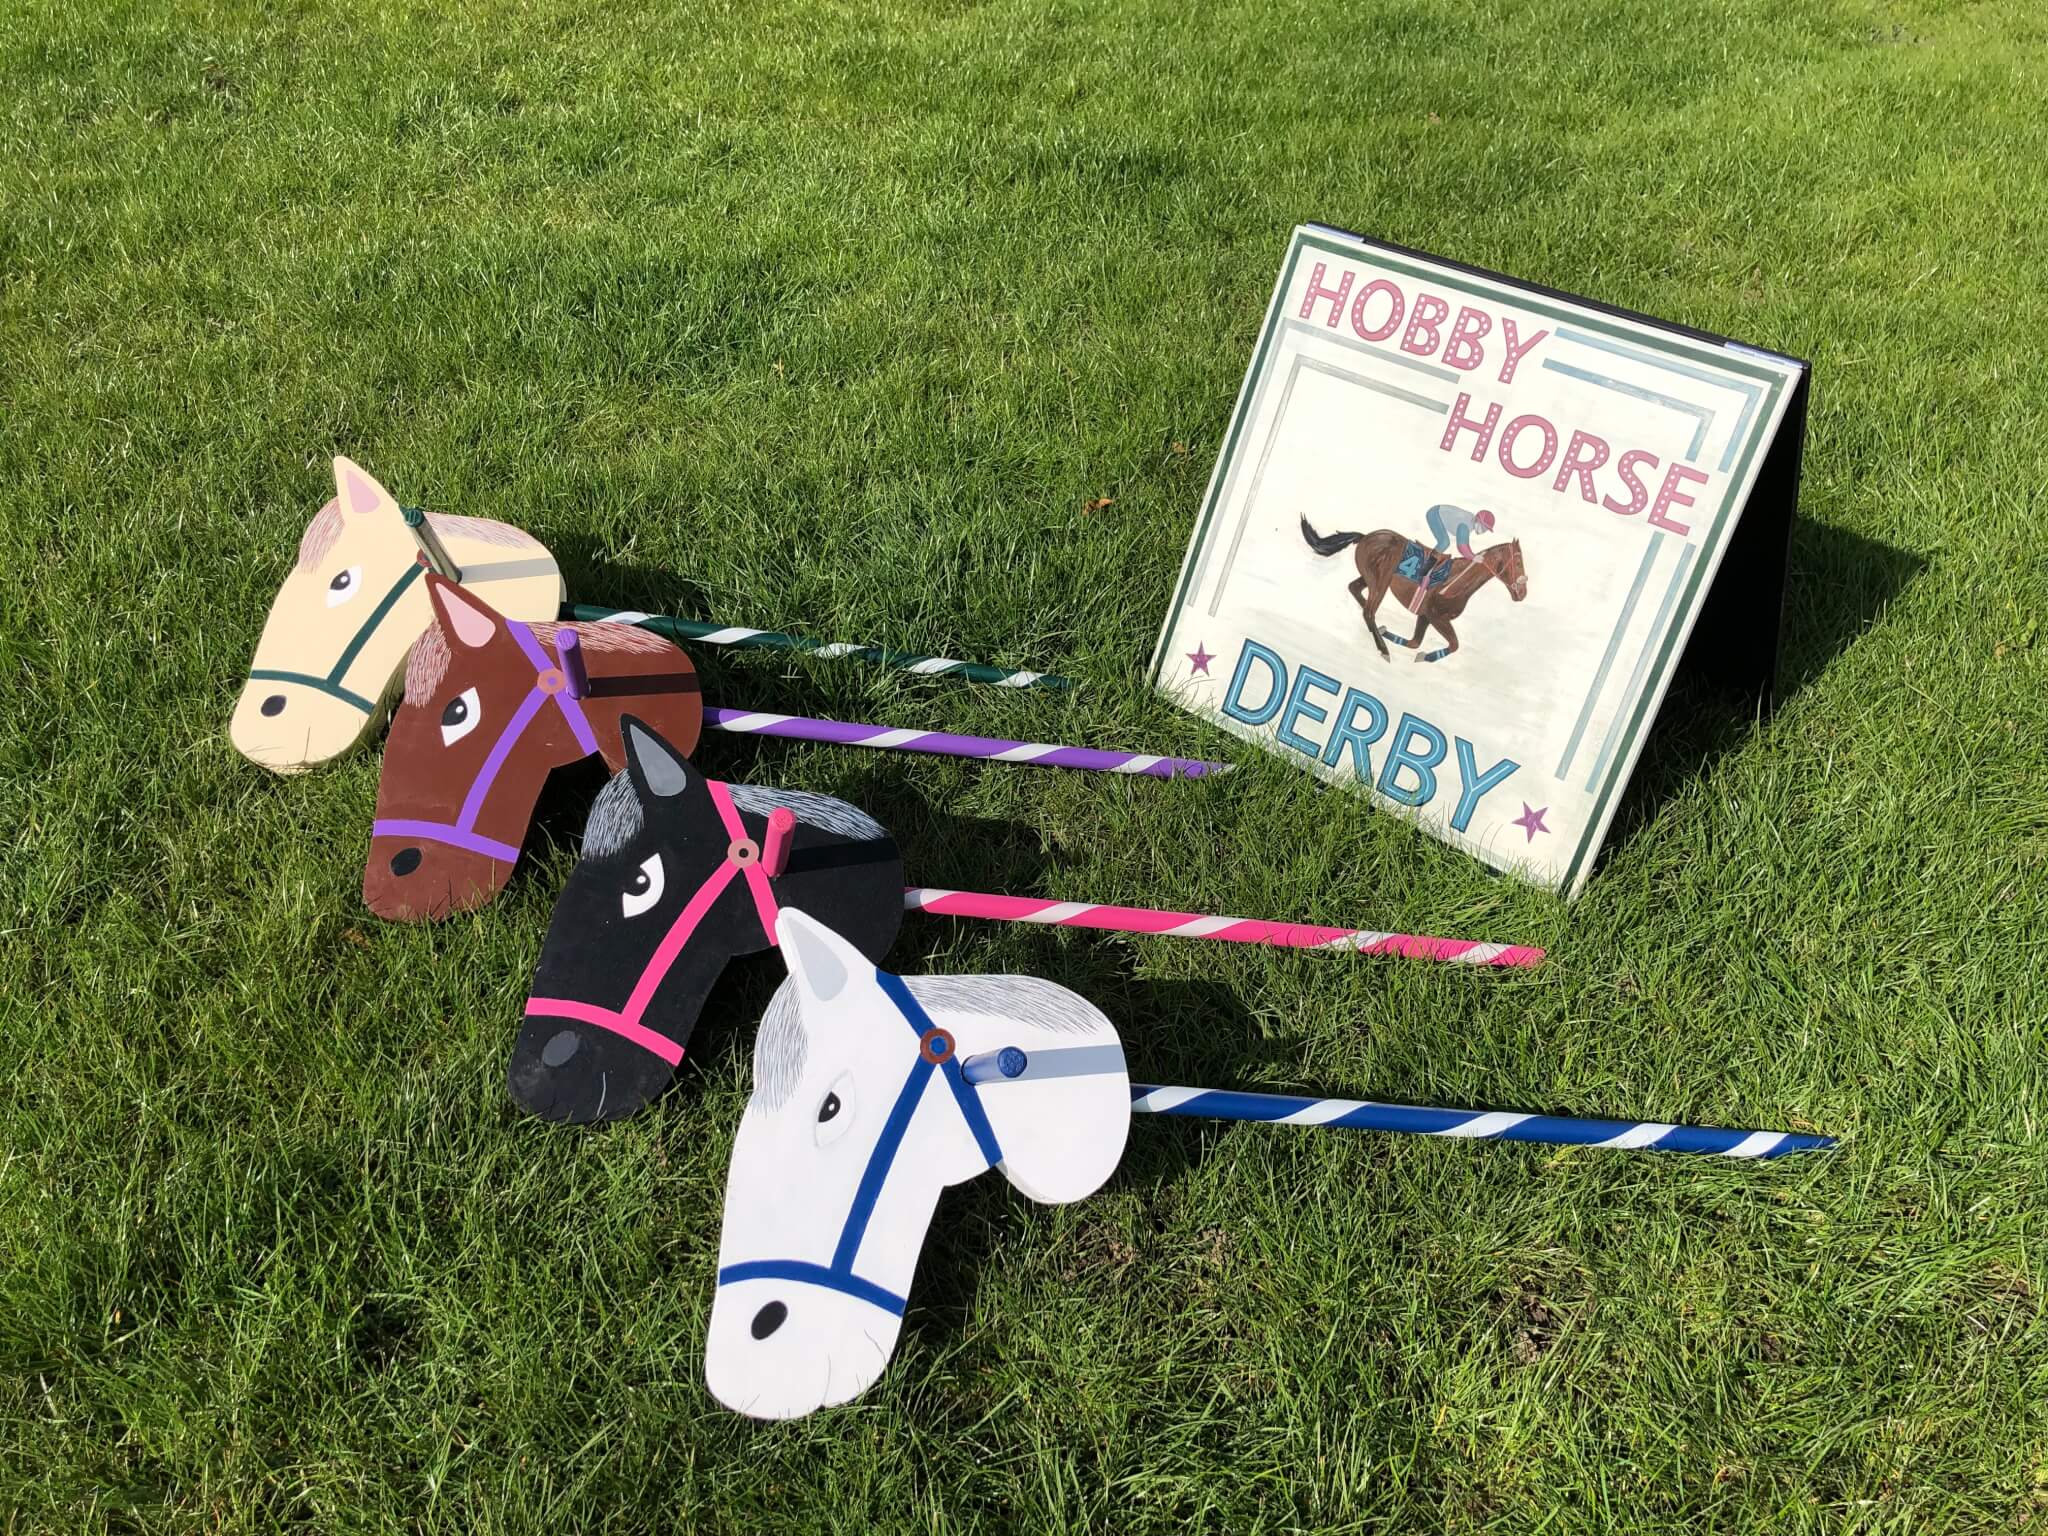 Hobby Horse Derby Game Hire in Sussex & Kent